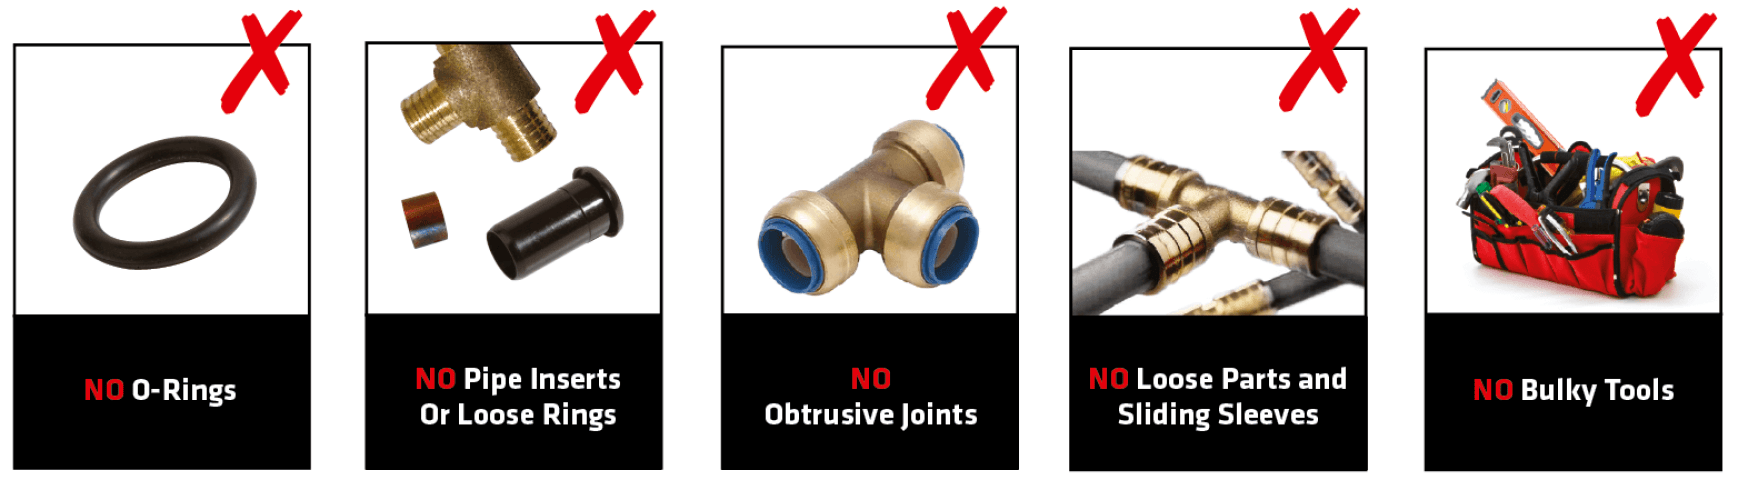 Buteline fittings graphic